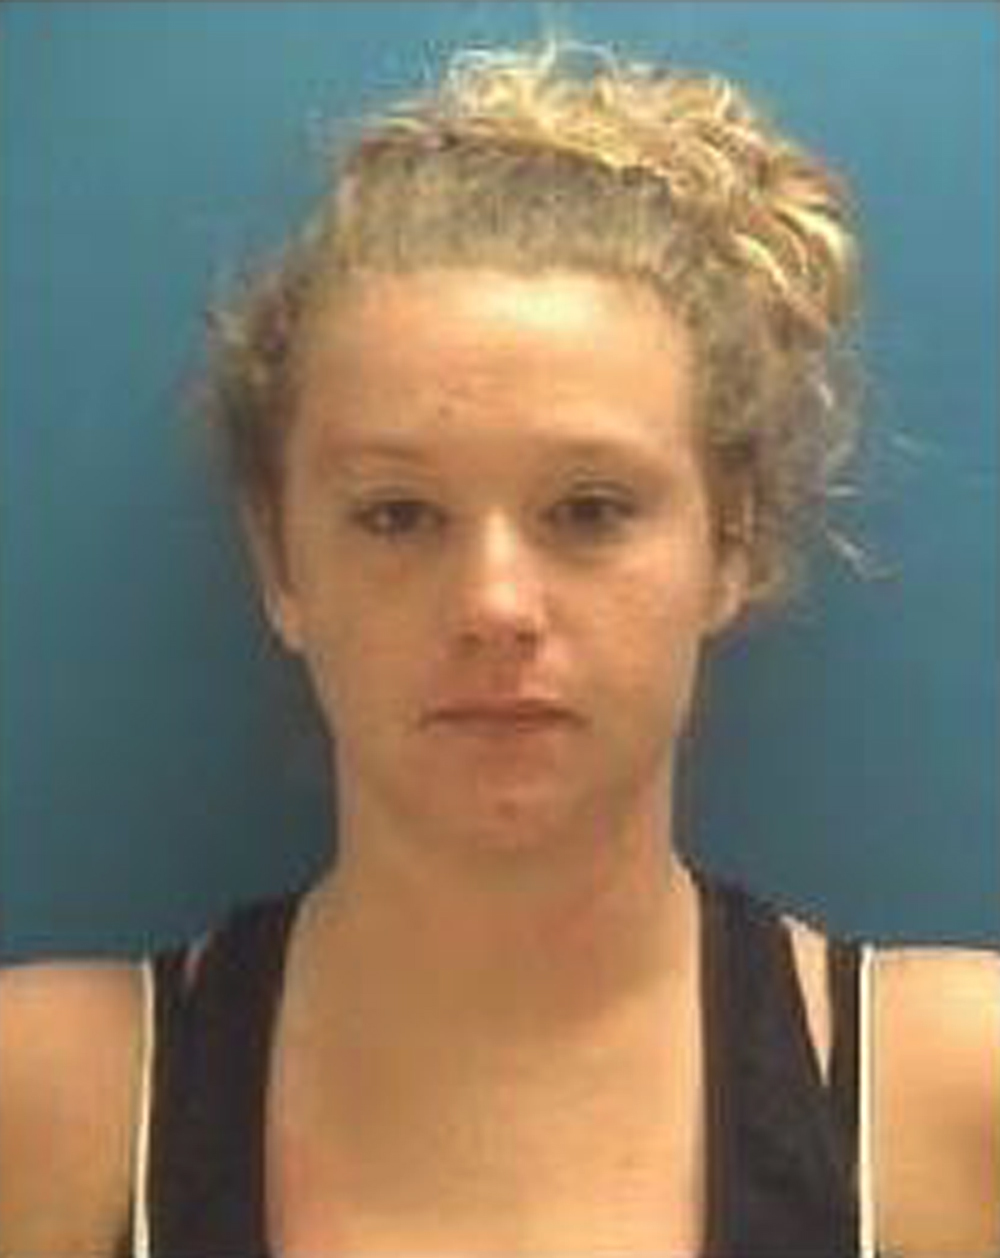 This photo provided by the Town of Hope Police Department shows Erika Hurt, who was charged of child neglect and possession of drug paraphernalia. The police department in Hope, Ind., said Hurt was found passed out from an overdose with her baby in the back seat of the car on Saturday, Oct. 22, 2016. (Town of Hope Police Department via AP)